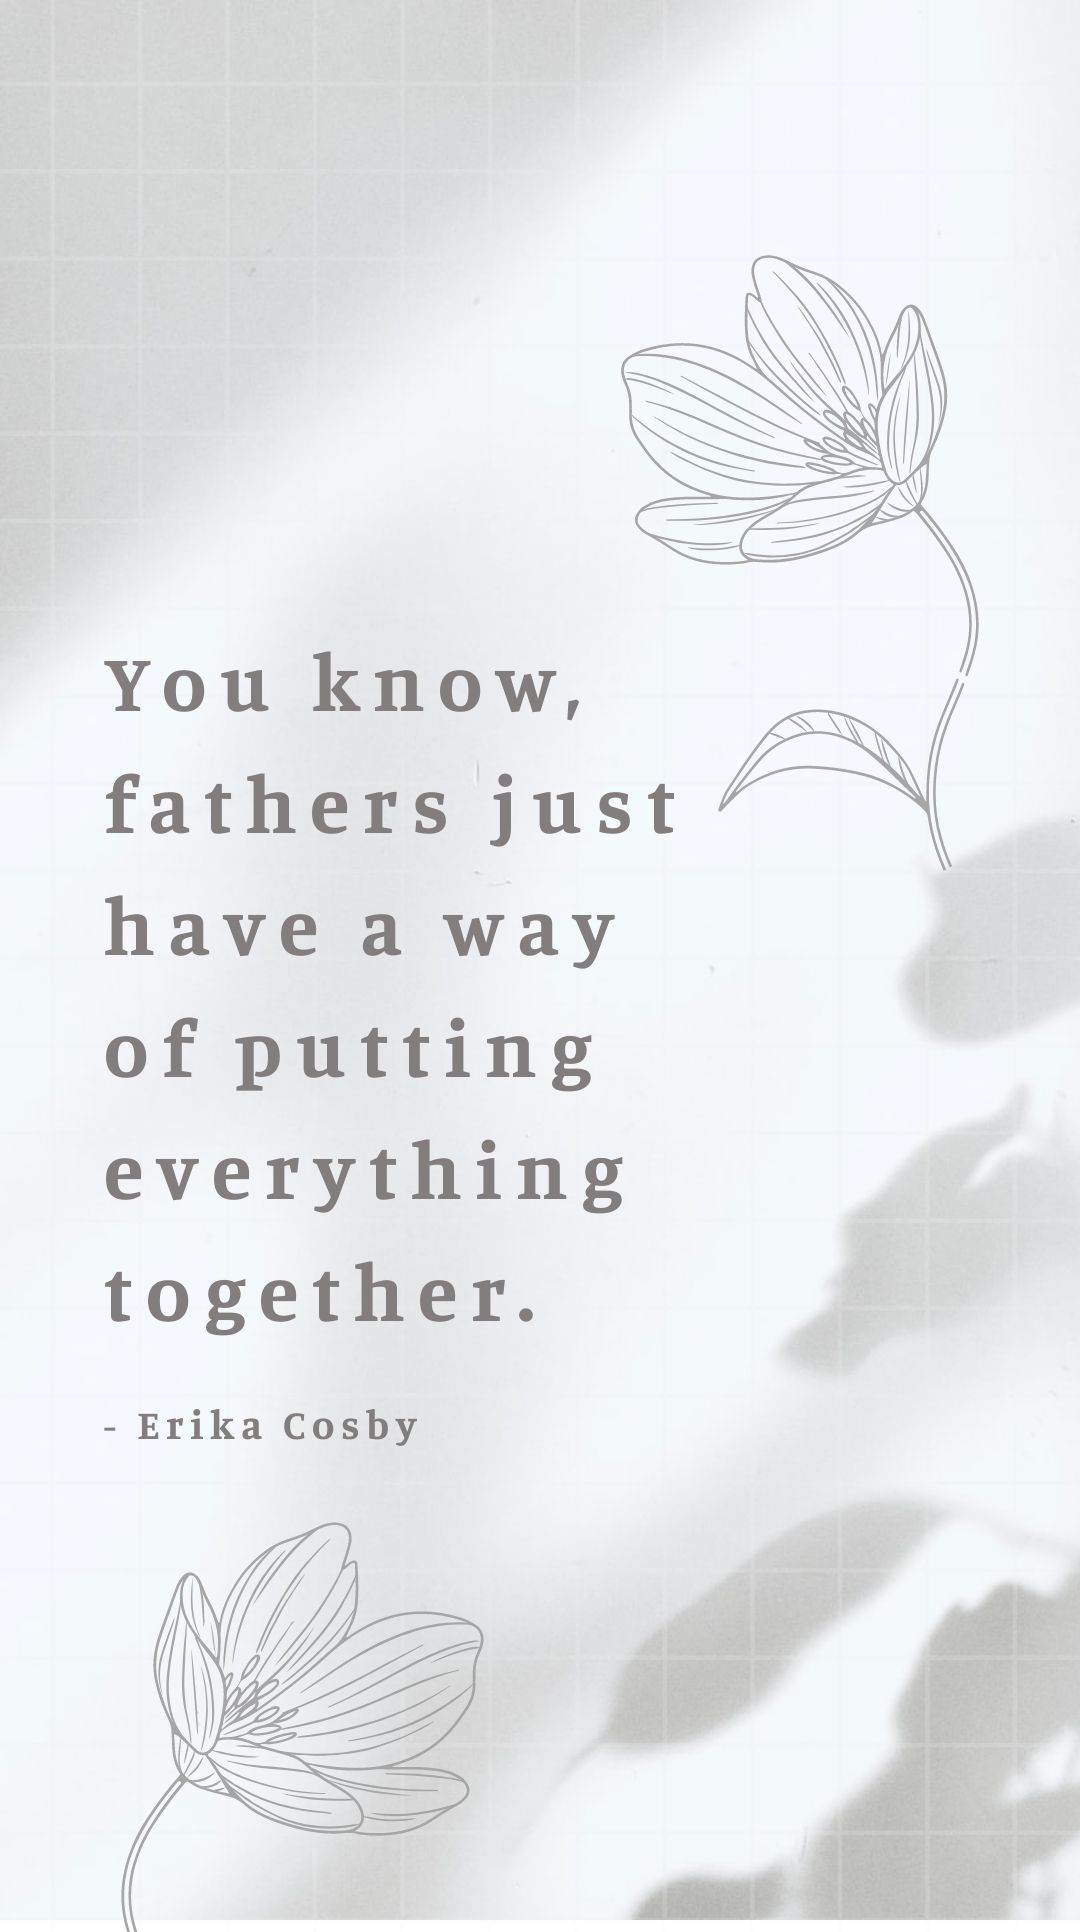 Erika Cosby - You know, fathers just have a way of putting everything together. in JPG